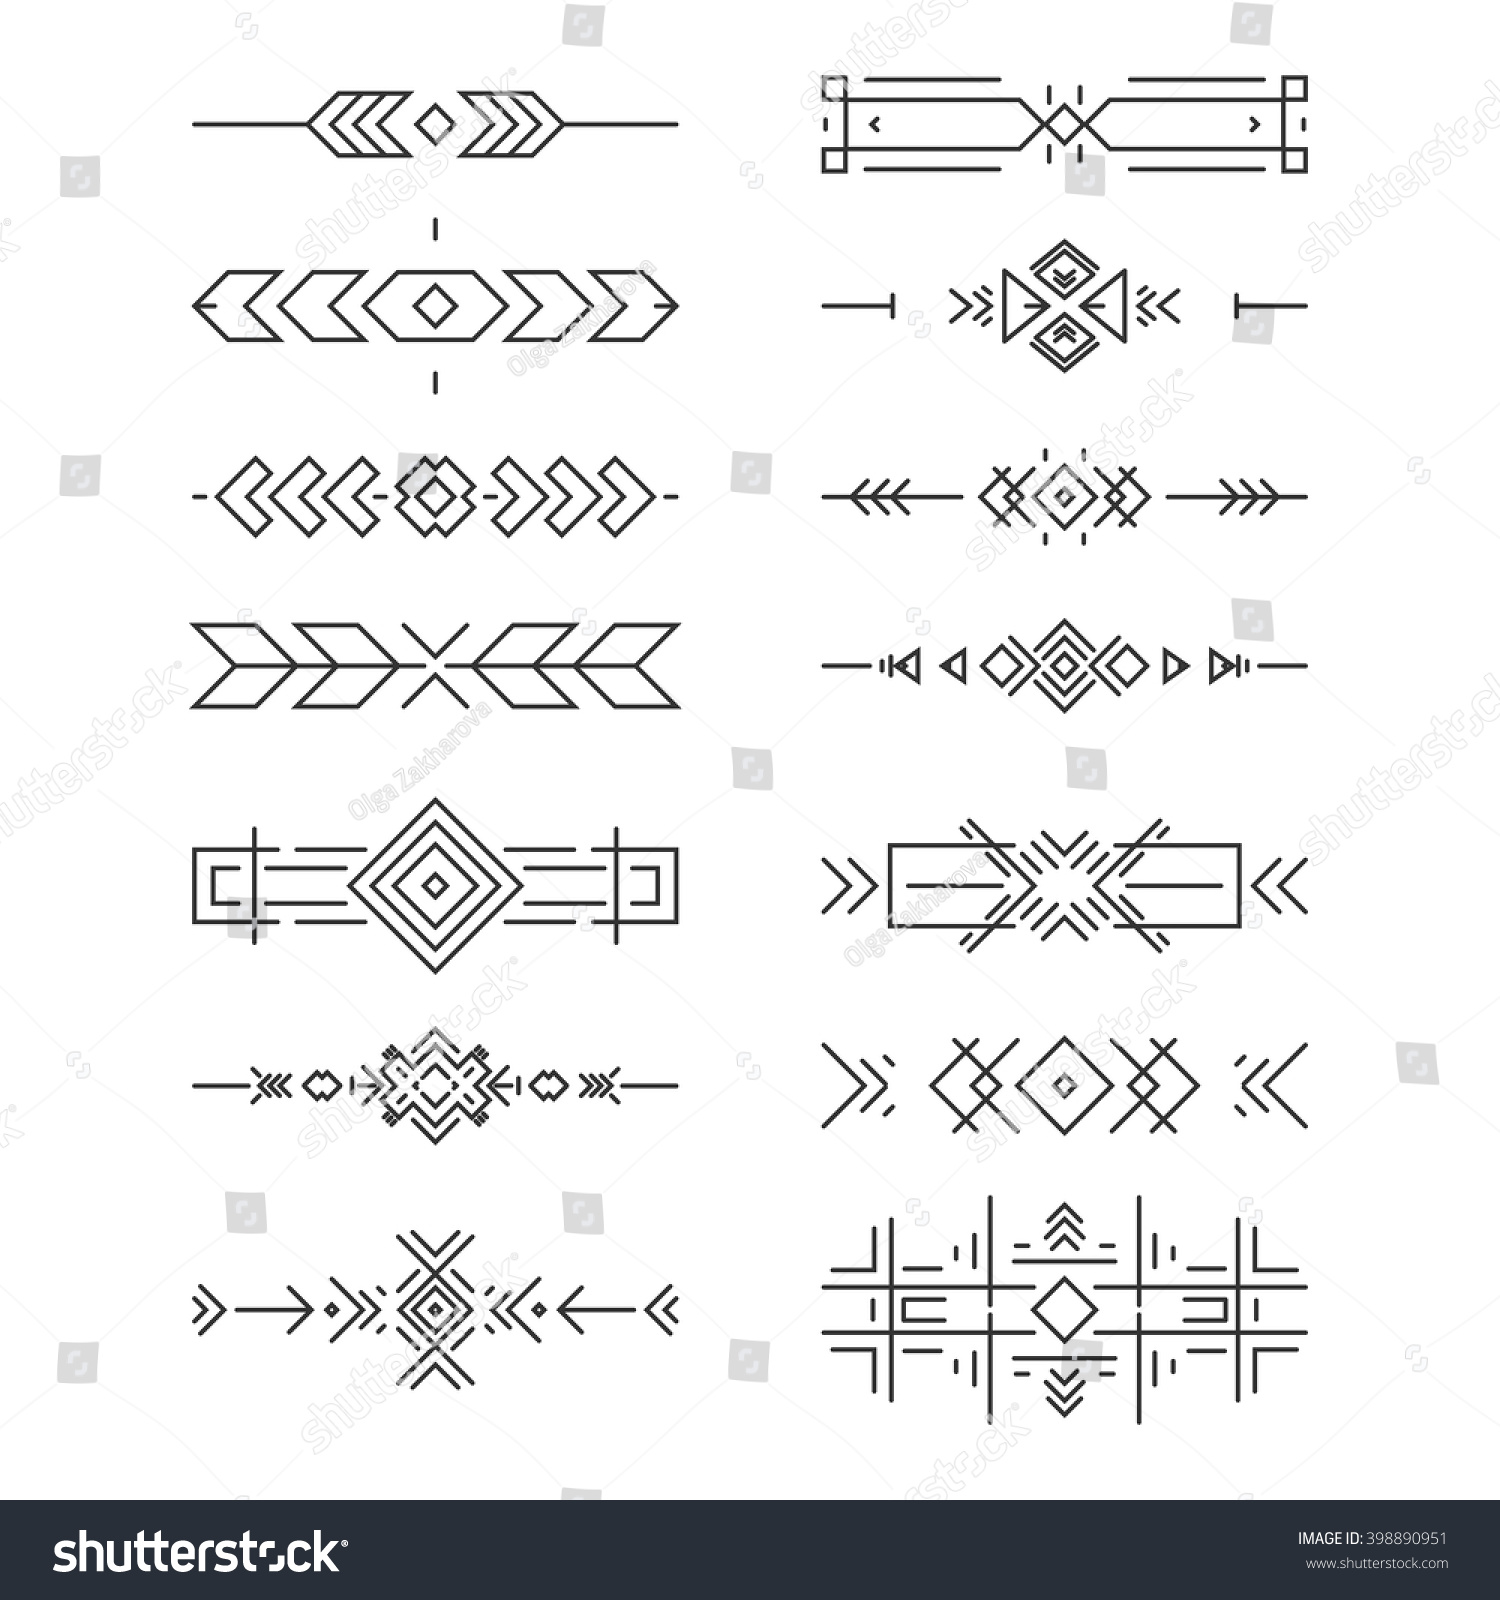 Aztec Border Collection Made Clean Modern Stock Vector (Royalty Free ...